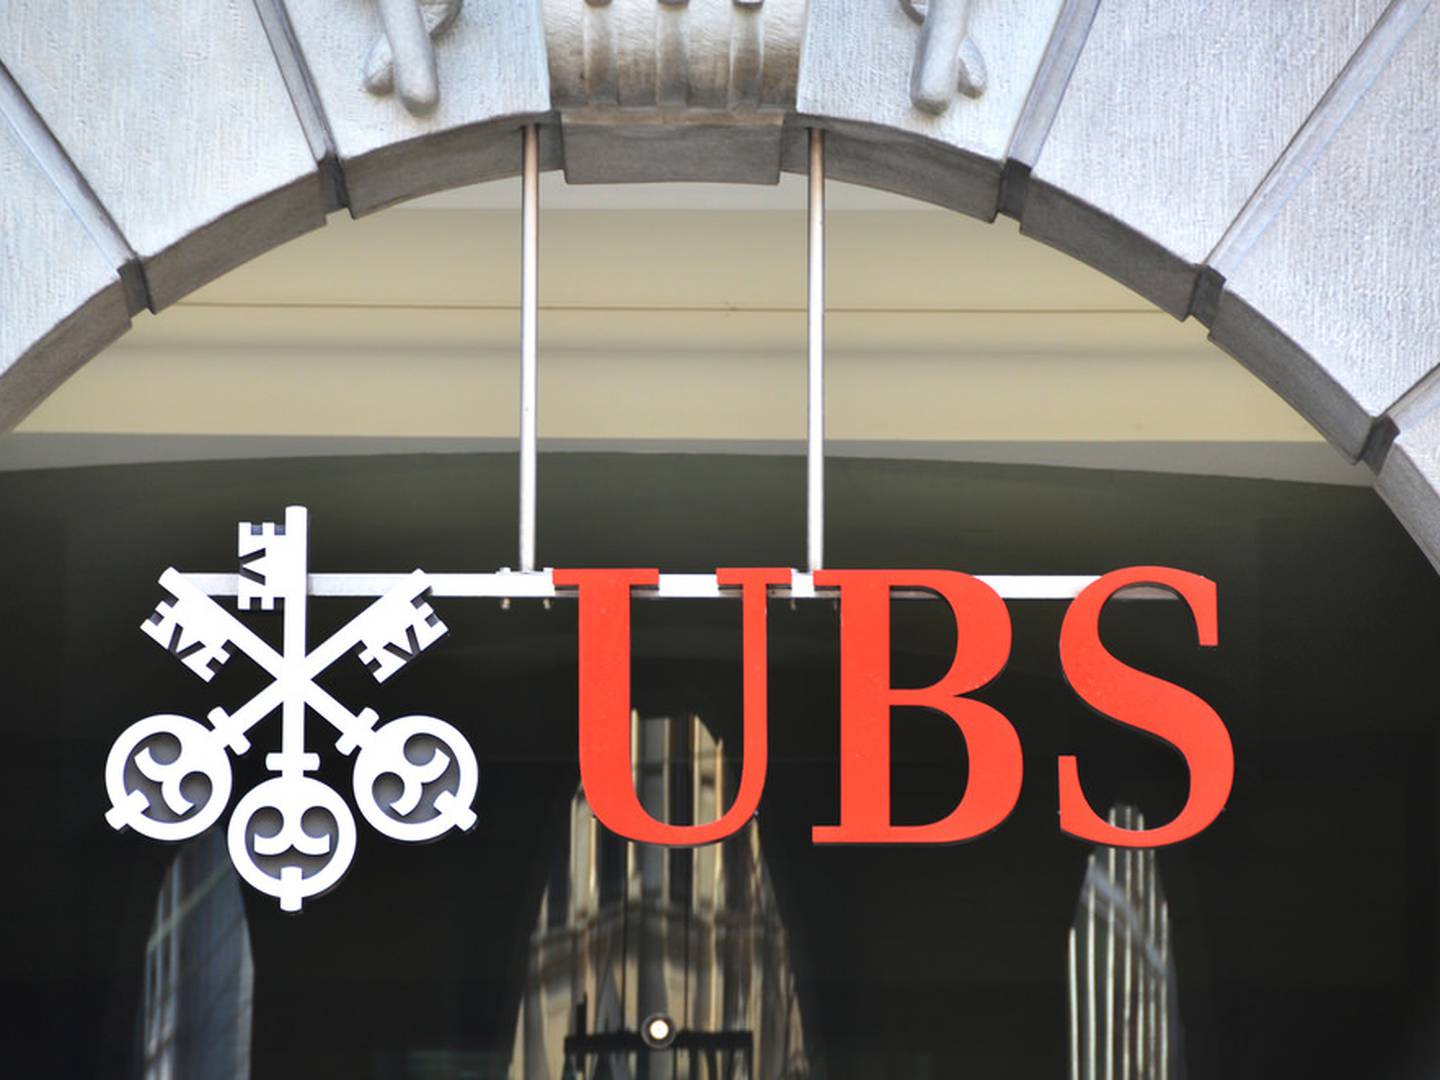 12 ubs bank policy for transactions with bitcoin